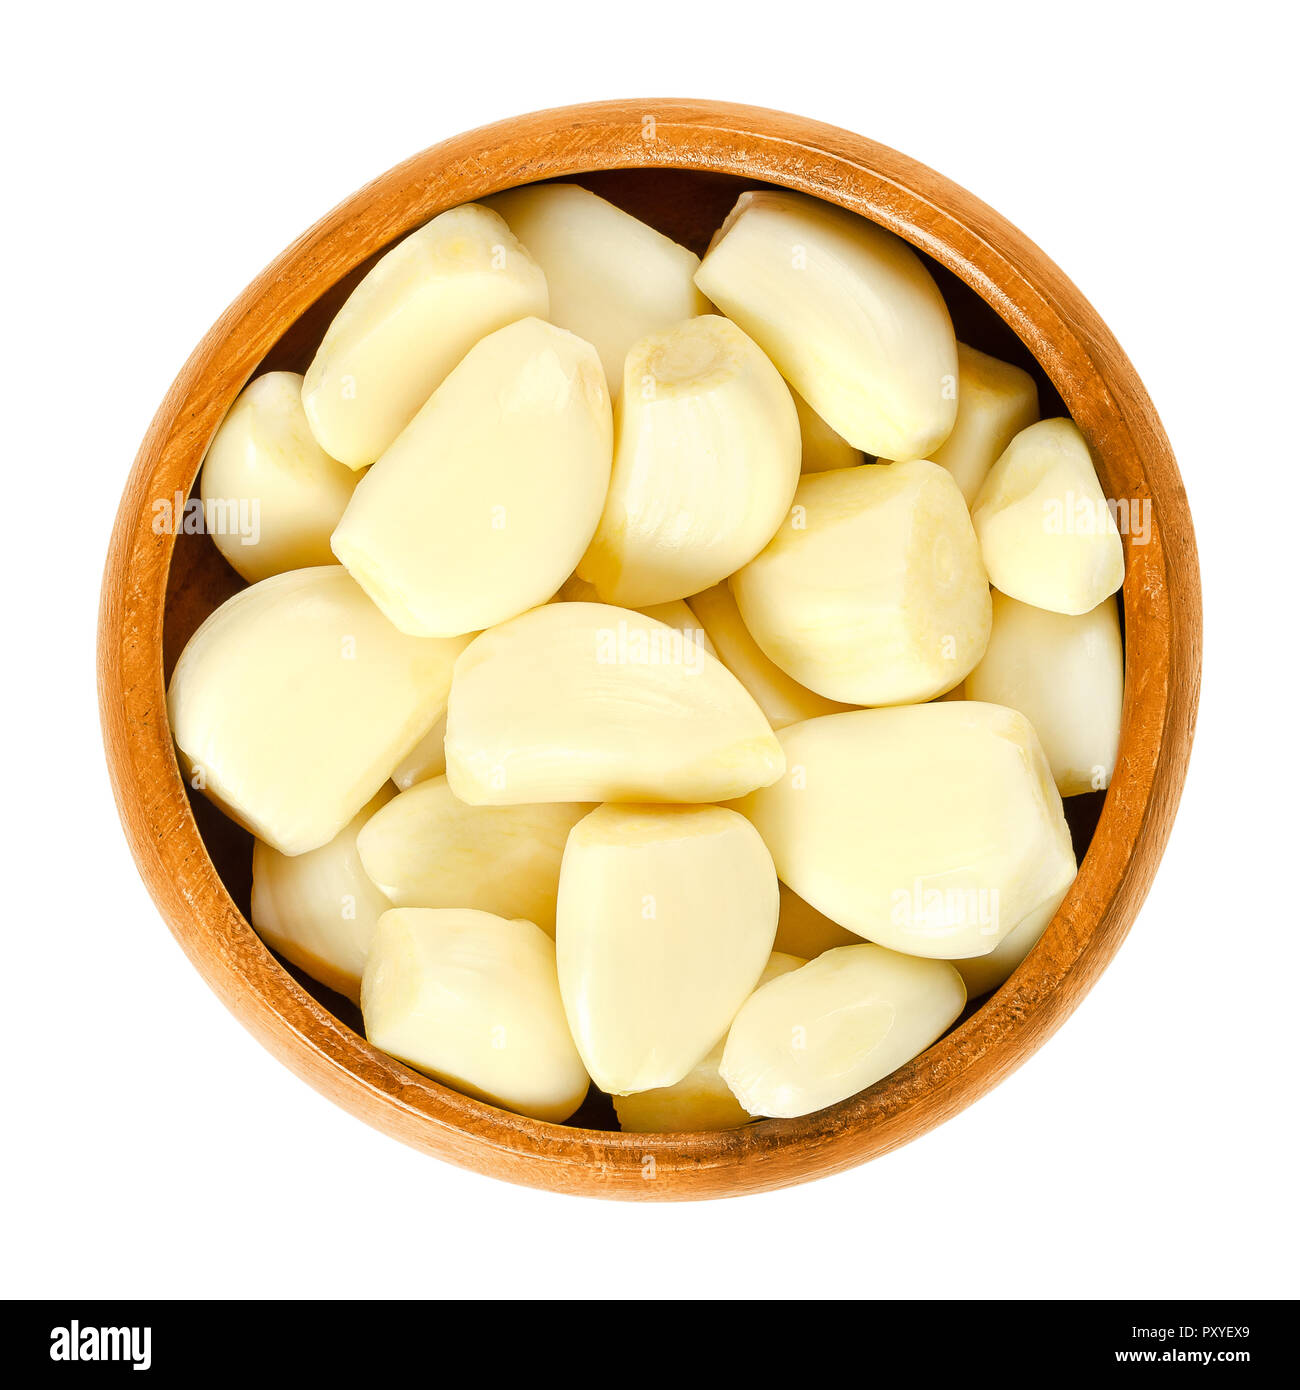 Peeled garlic cloves in wooden bowl. Allium sativum, with its pungent flavor is used as a seasoning or condiment and also in medicine. Stock Photo